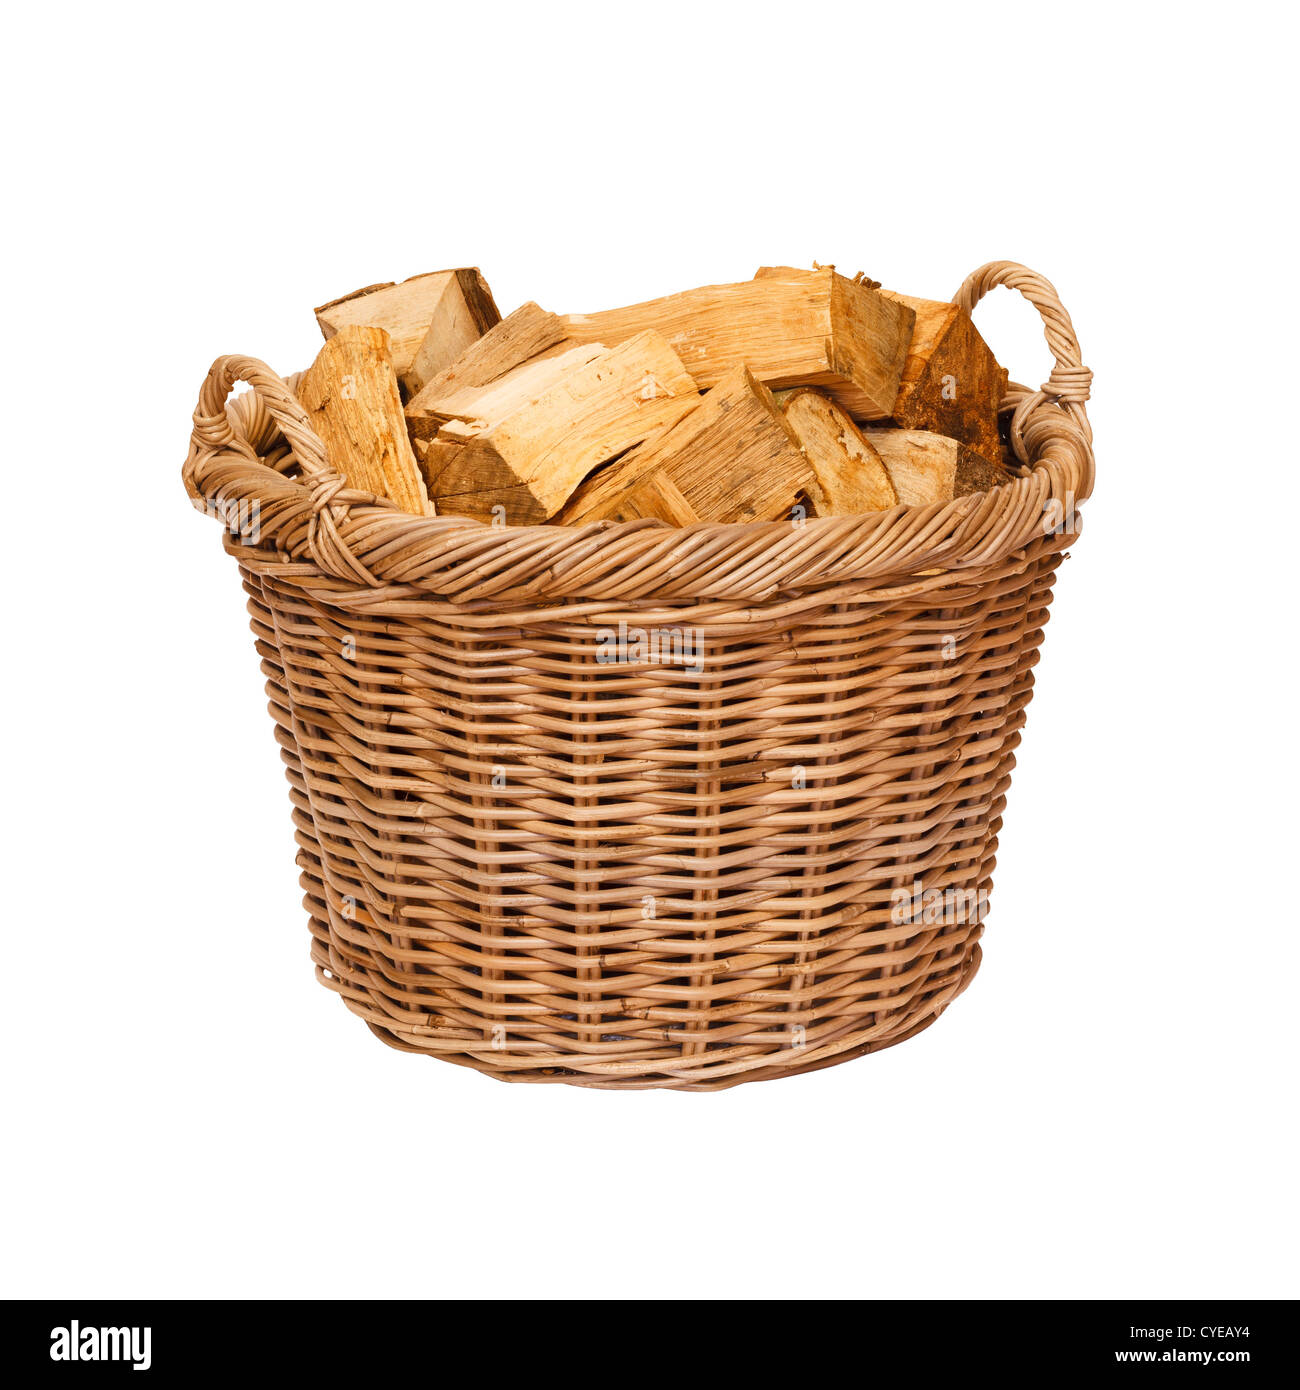 Traditional wicker log basket with oak logs isolated against a white background Stock Photo